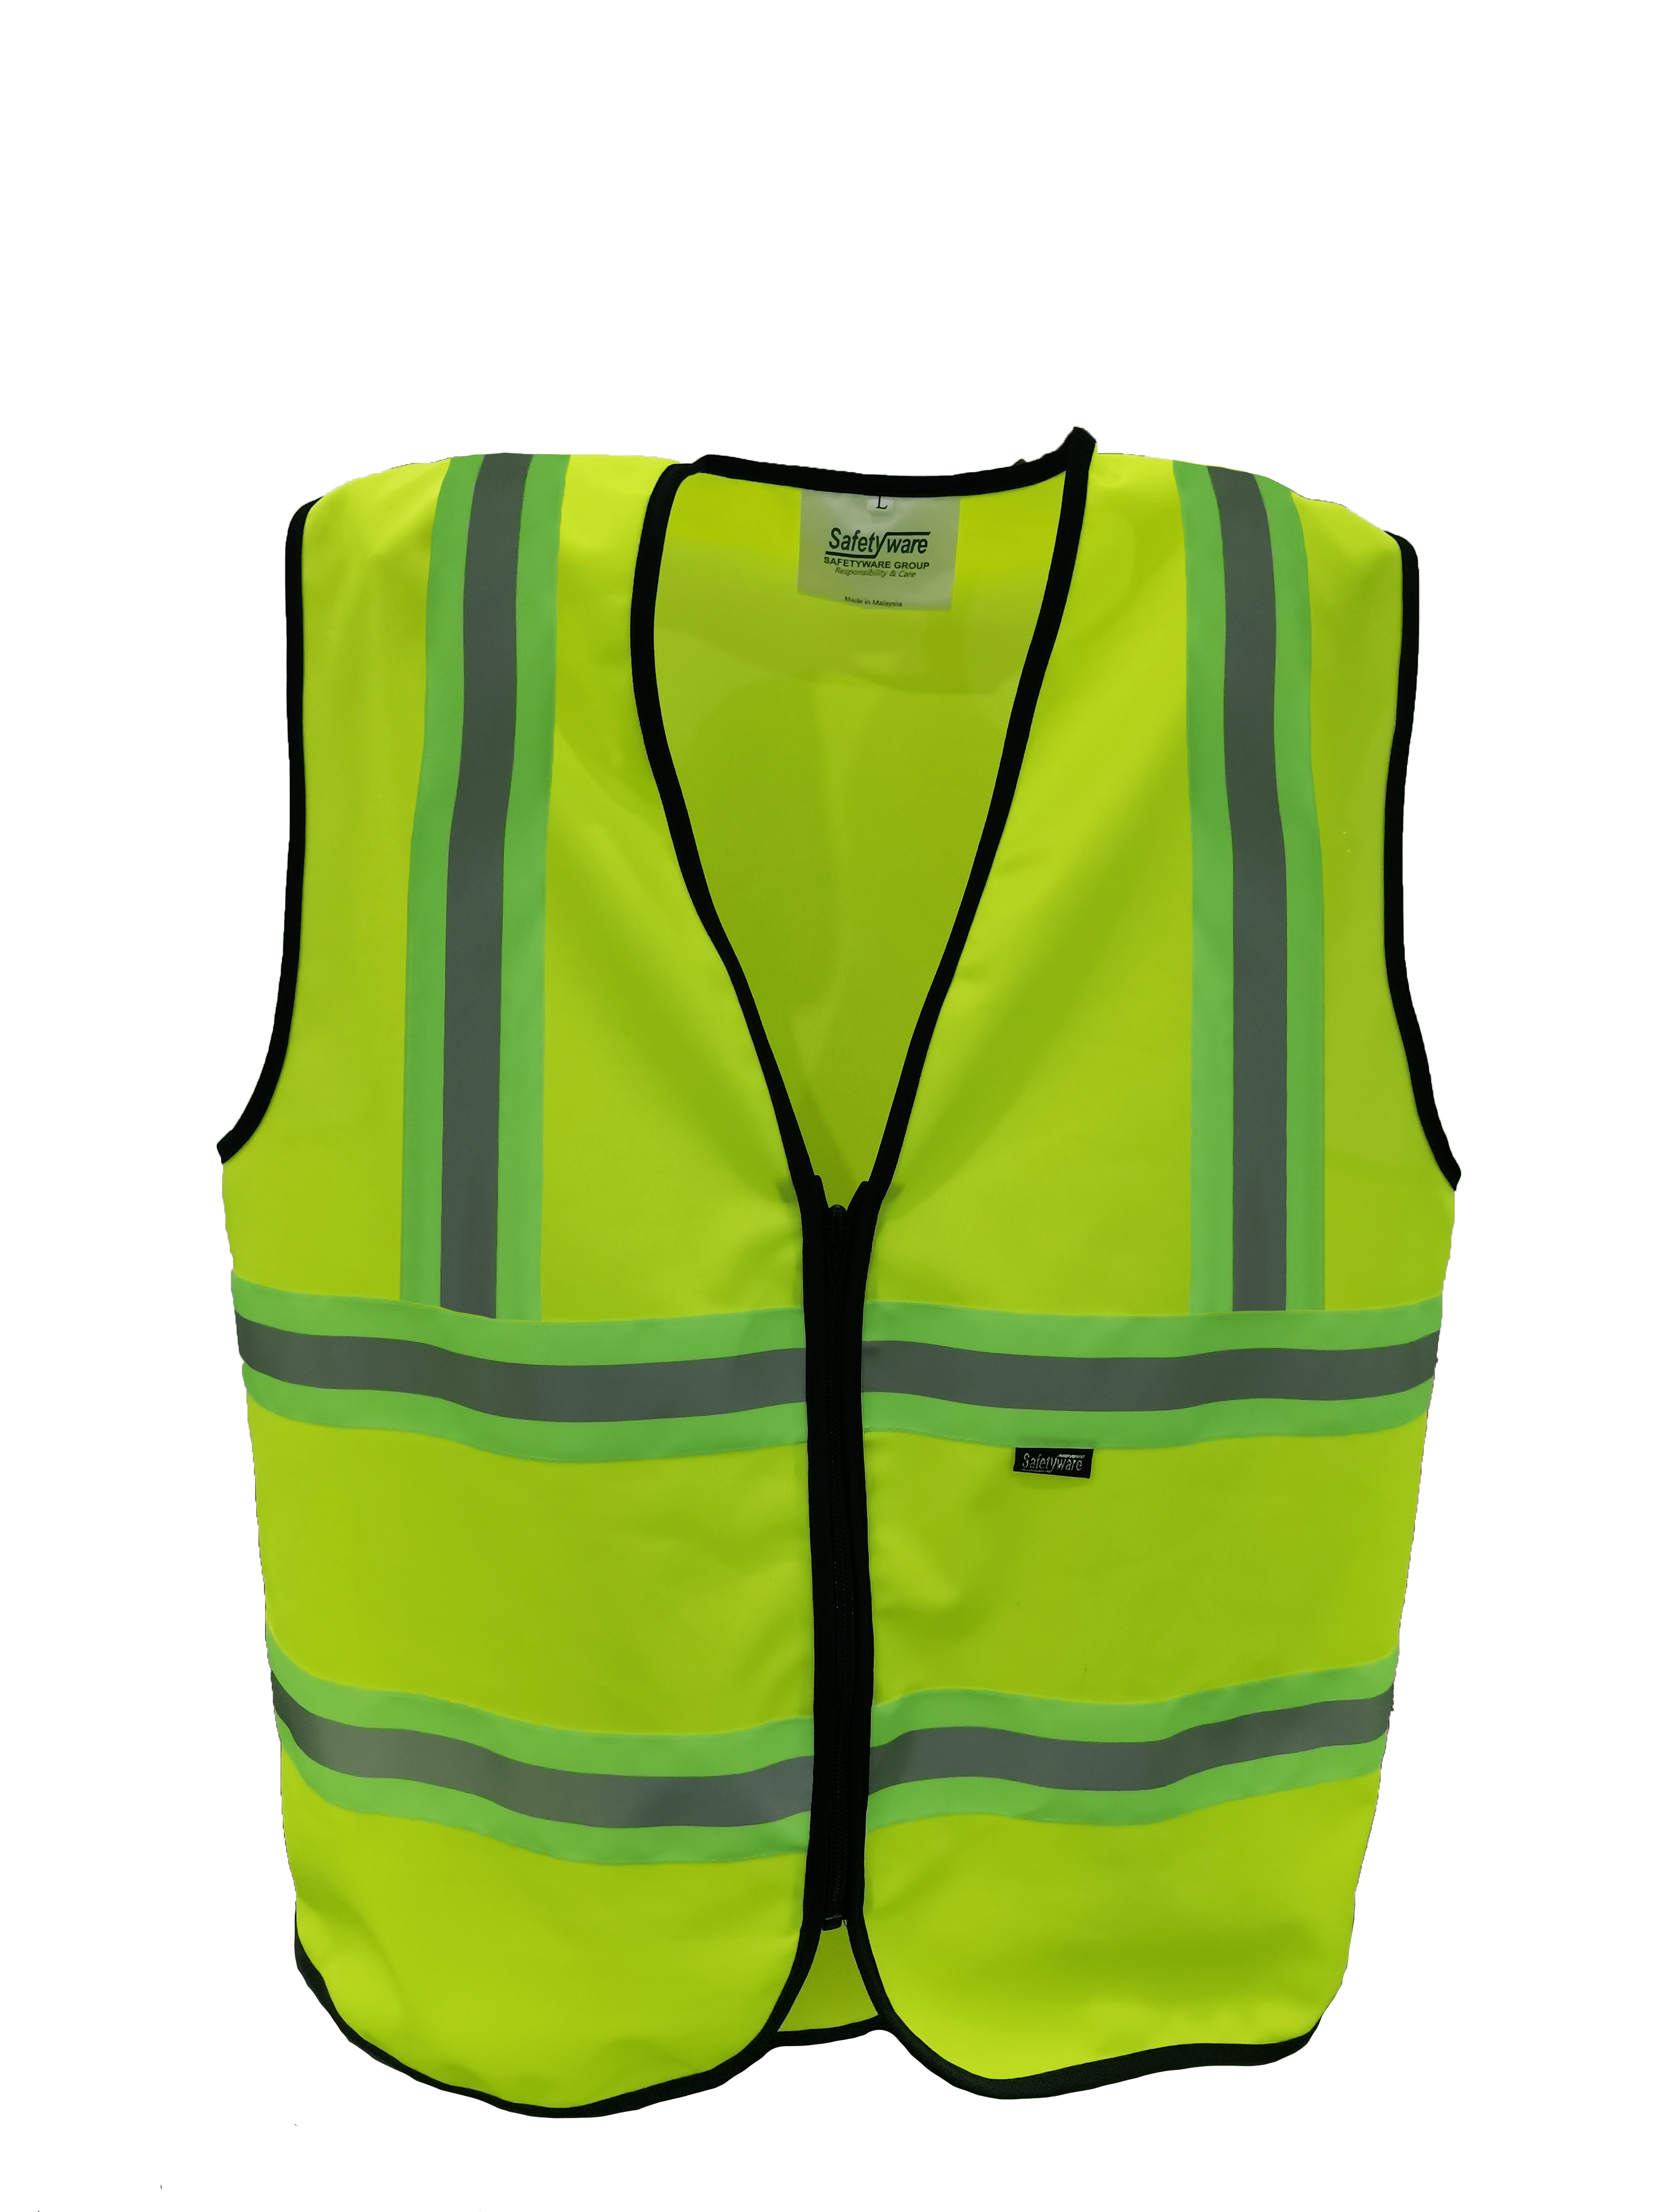 Safetyware Triple Protection Safety Vest - Safetyware Sdn Bhd